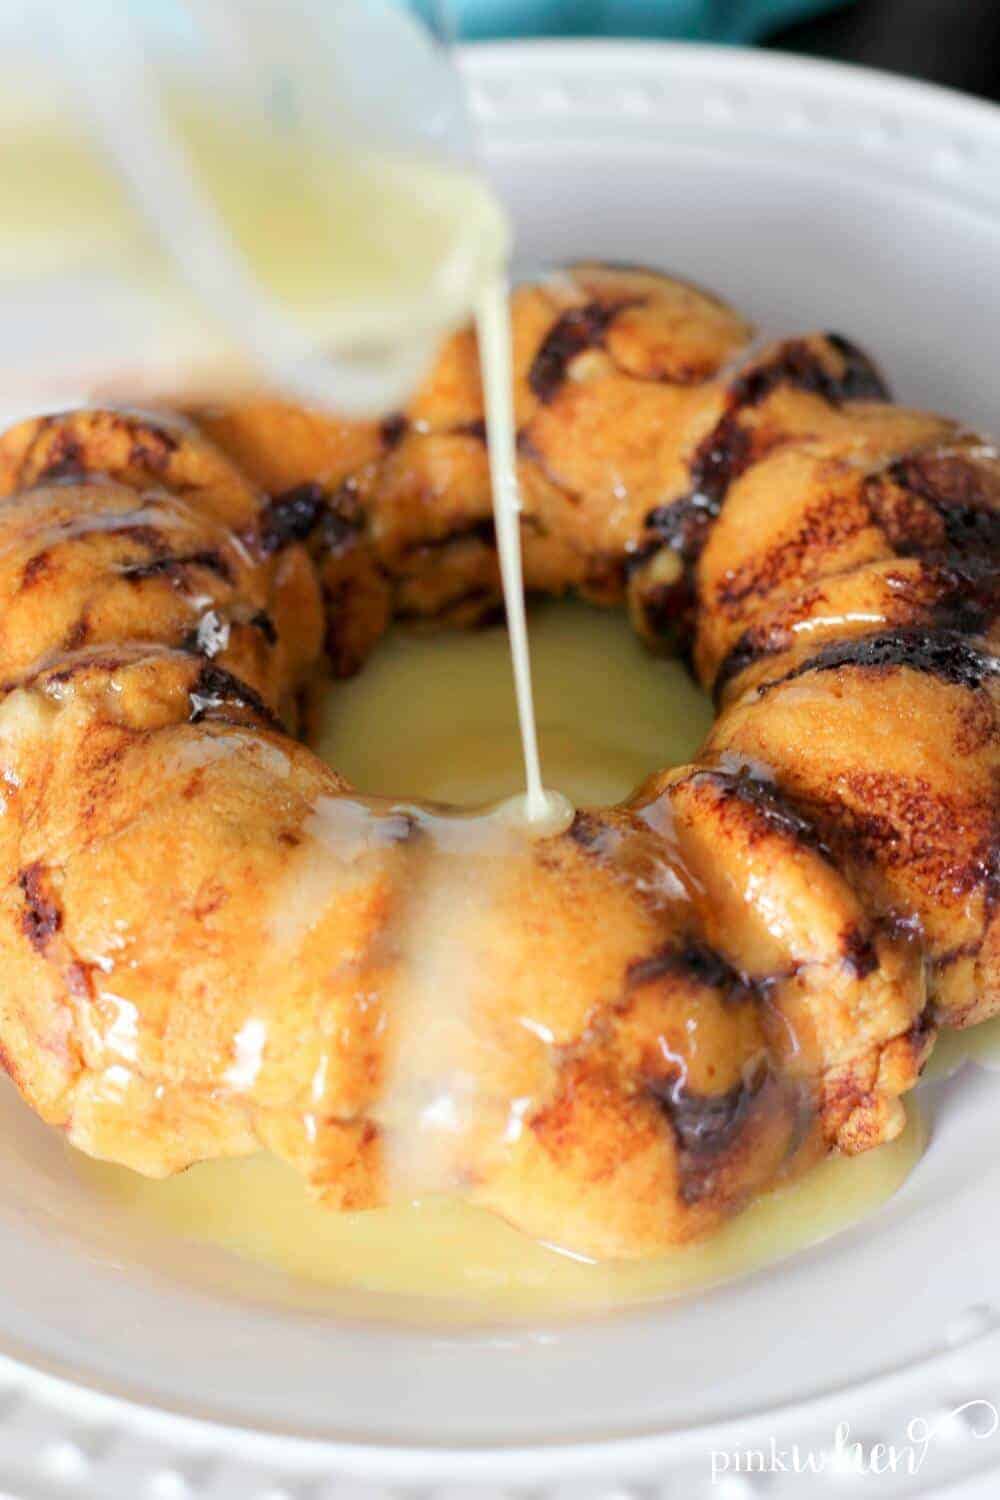 This easy Instant Pot Monkey Bread recipe is one of our favorite lazy day snacks and a perfect recipe if you are new to pressure cooking.